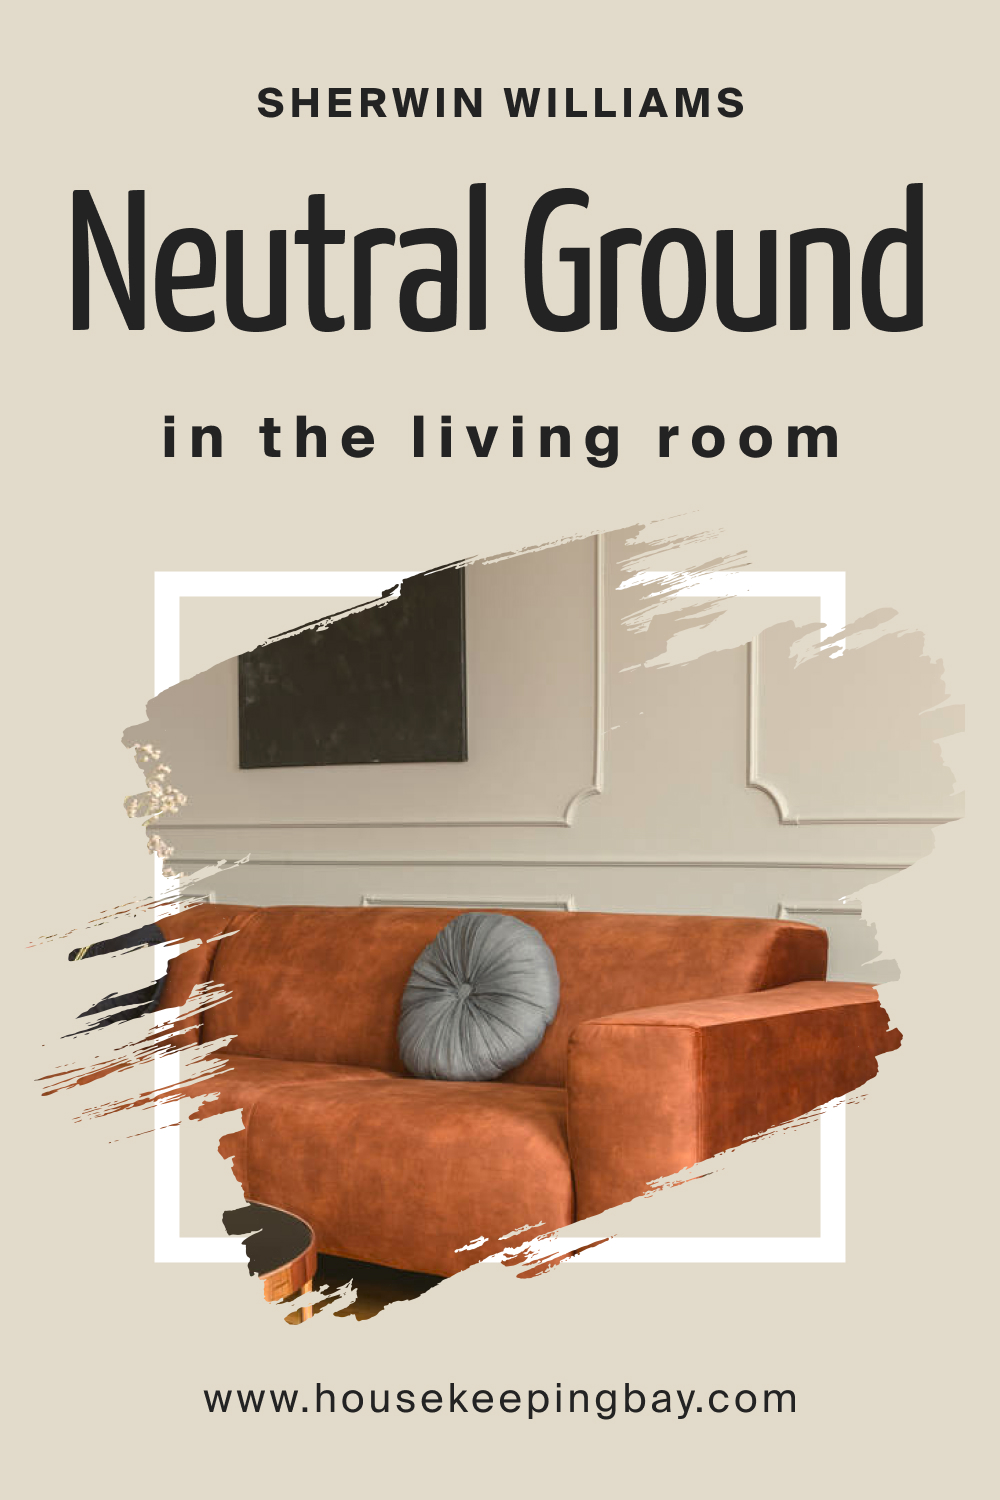 Sherwin Williams. Neutral Ground In the Living Room